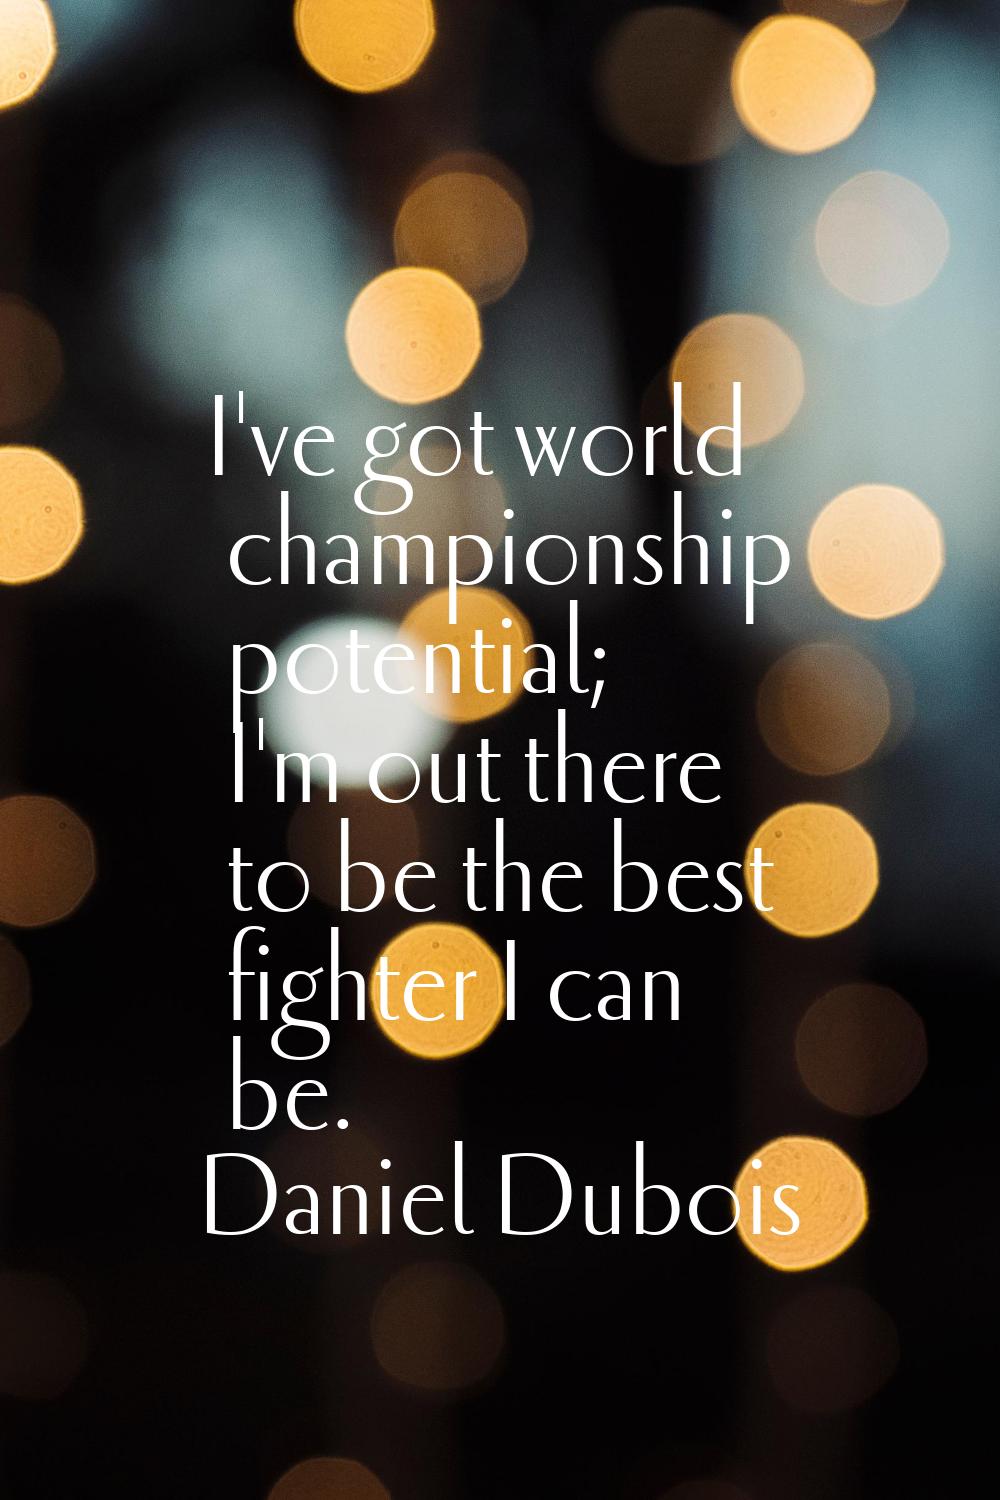 I've got world championship potential; I'm out there to be the best fighter I can be.